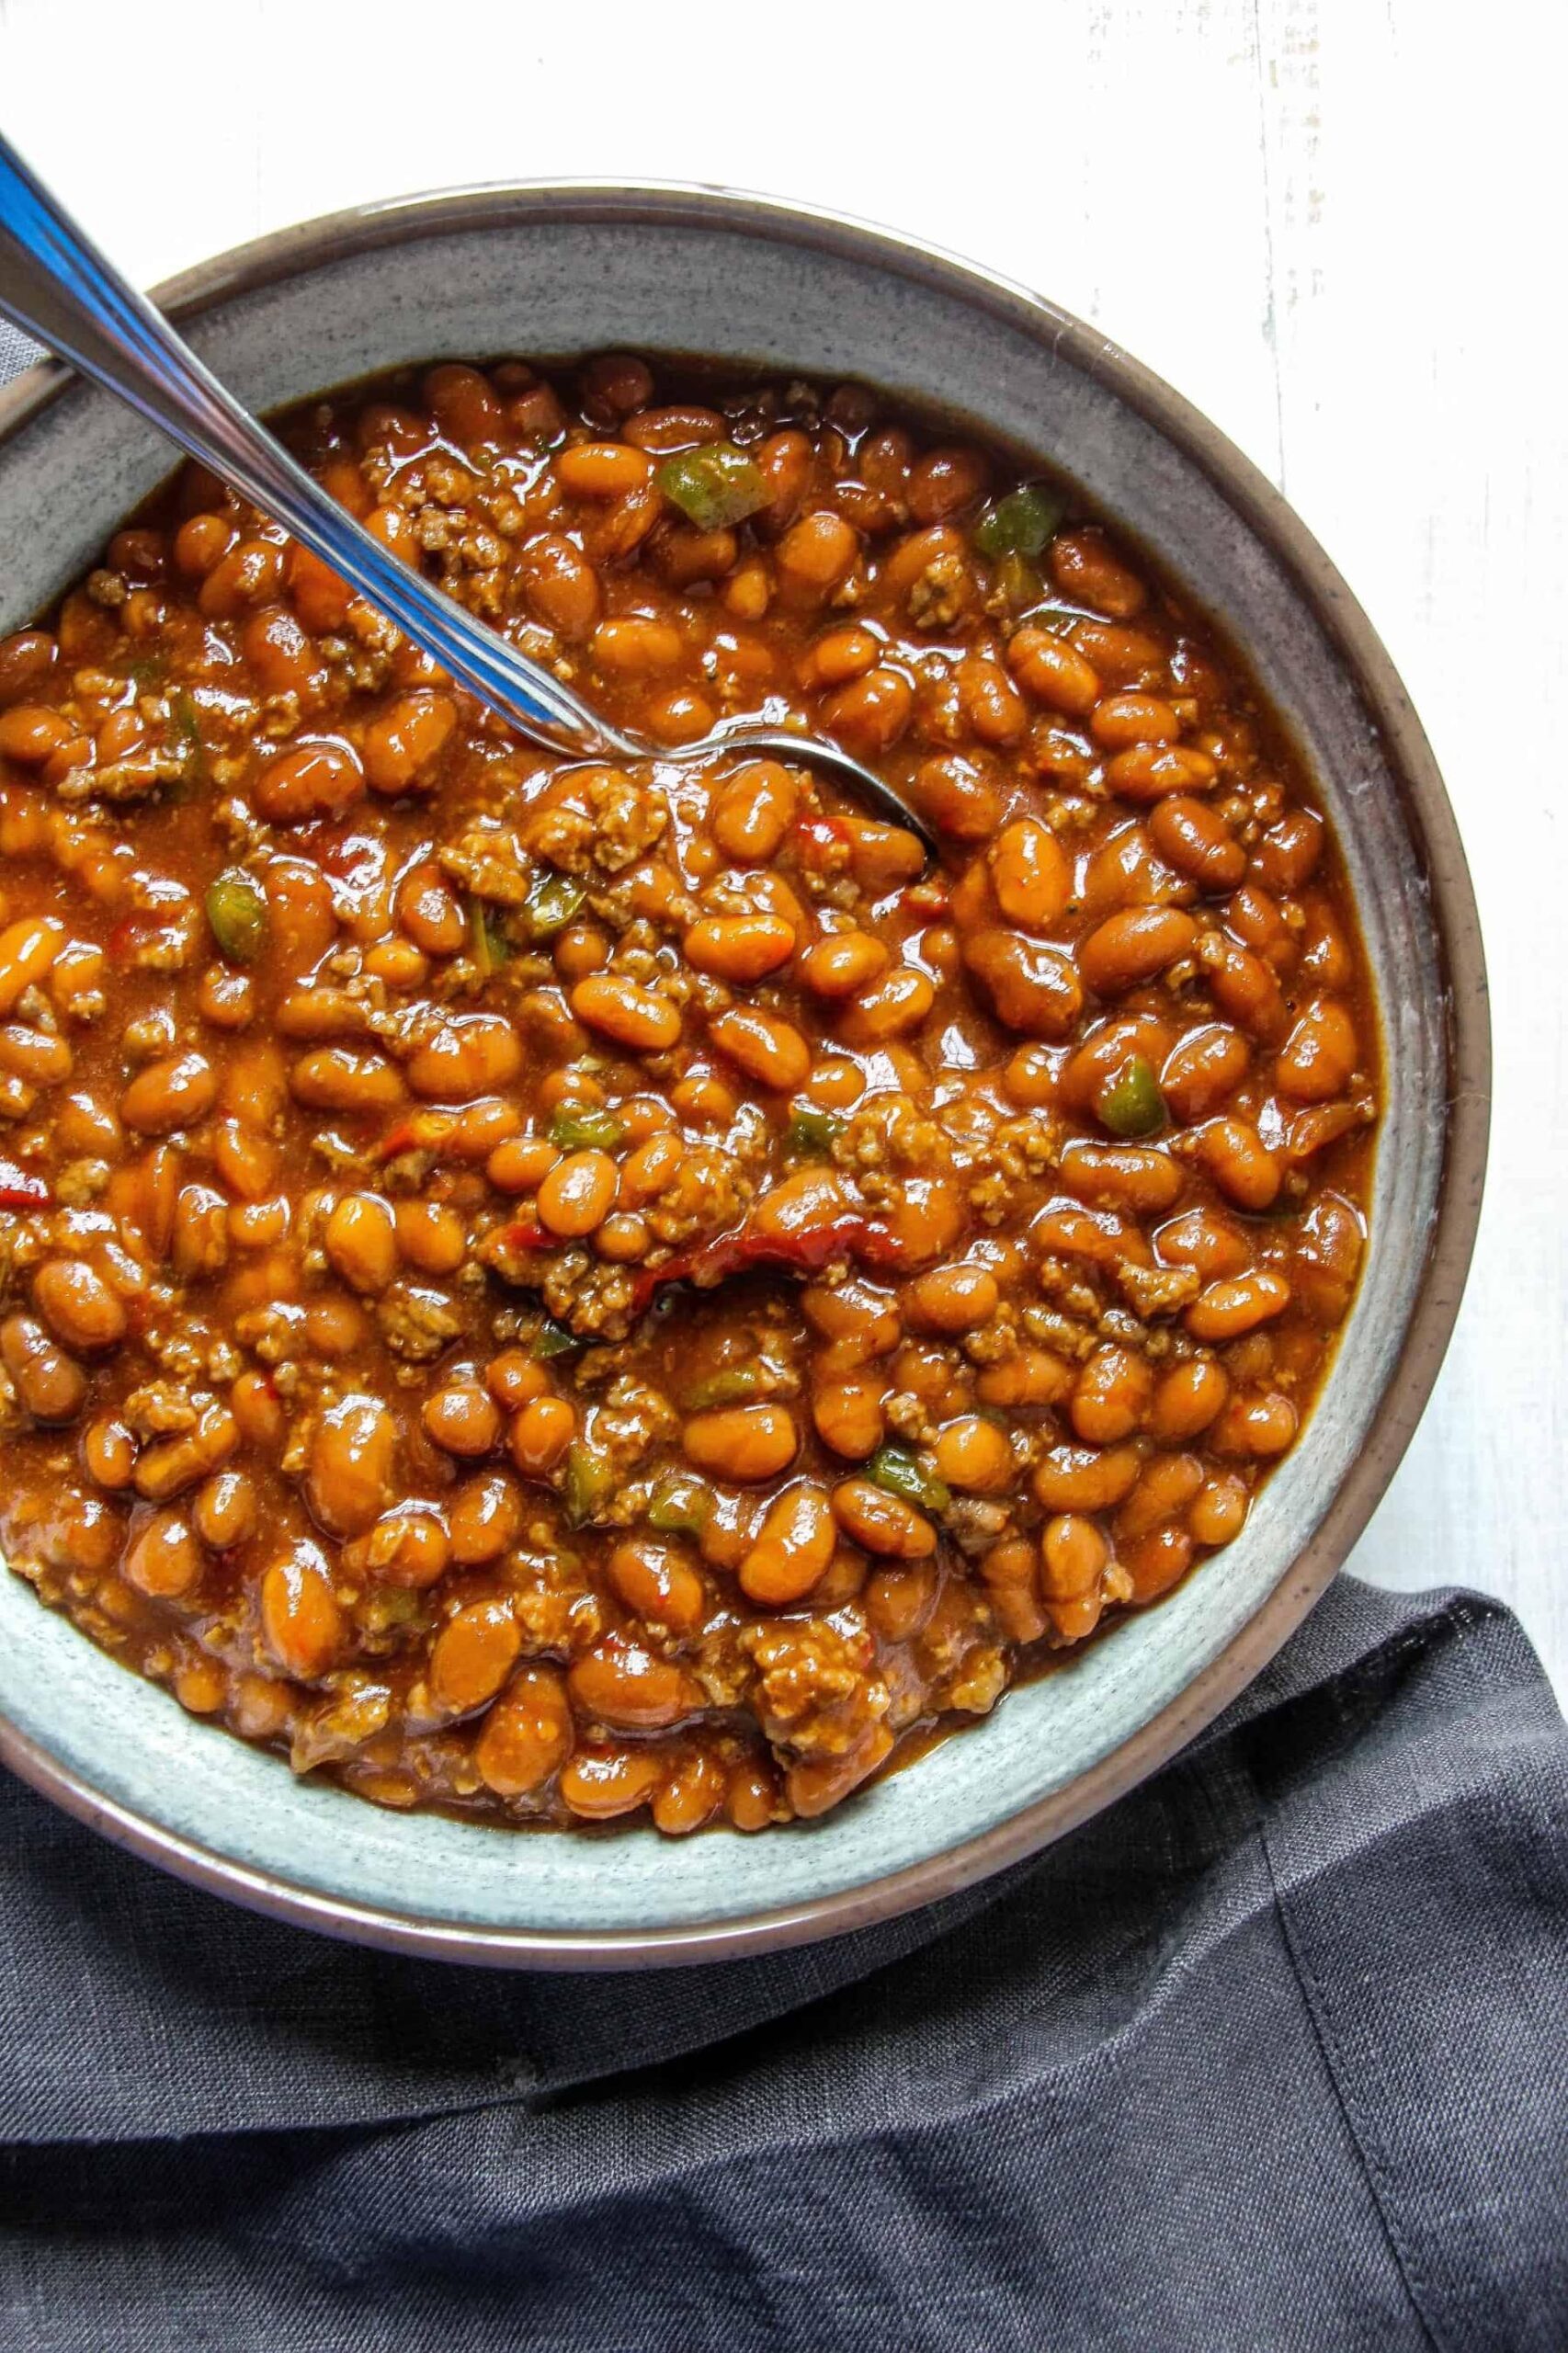  One scoop of these beans and you'll feel like you're down south.